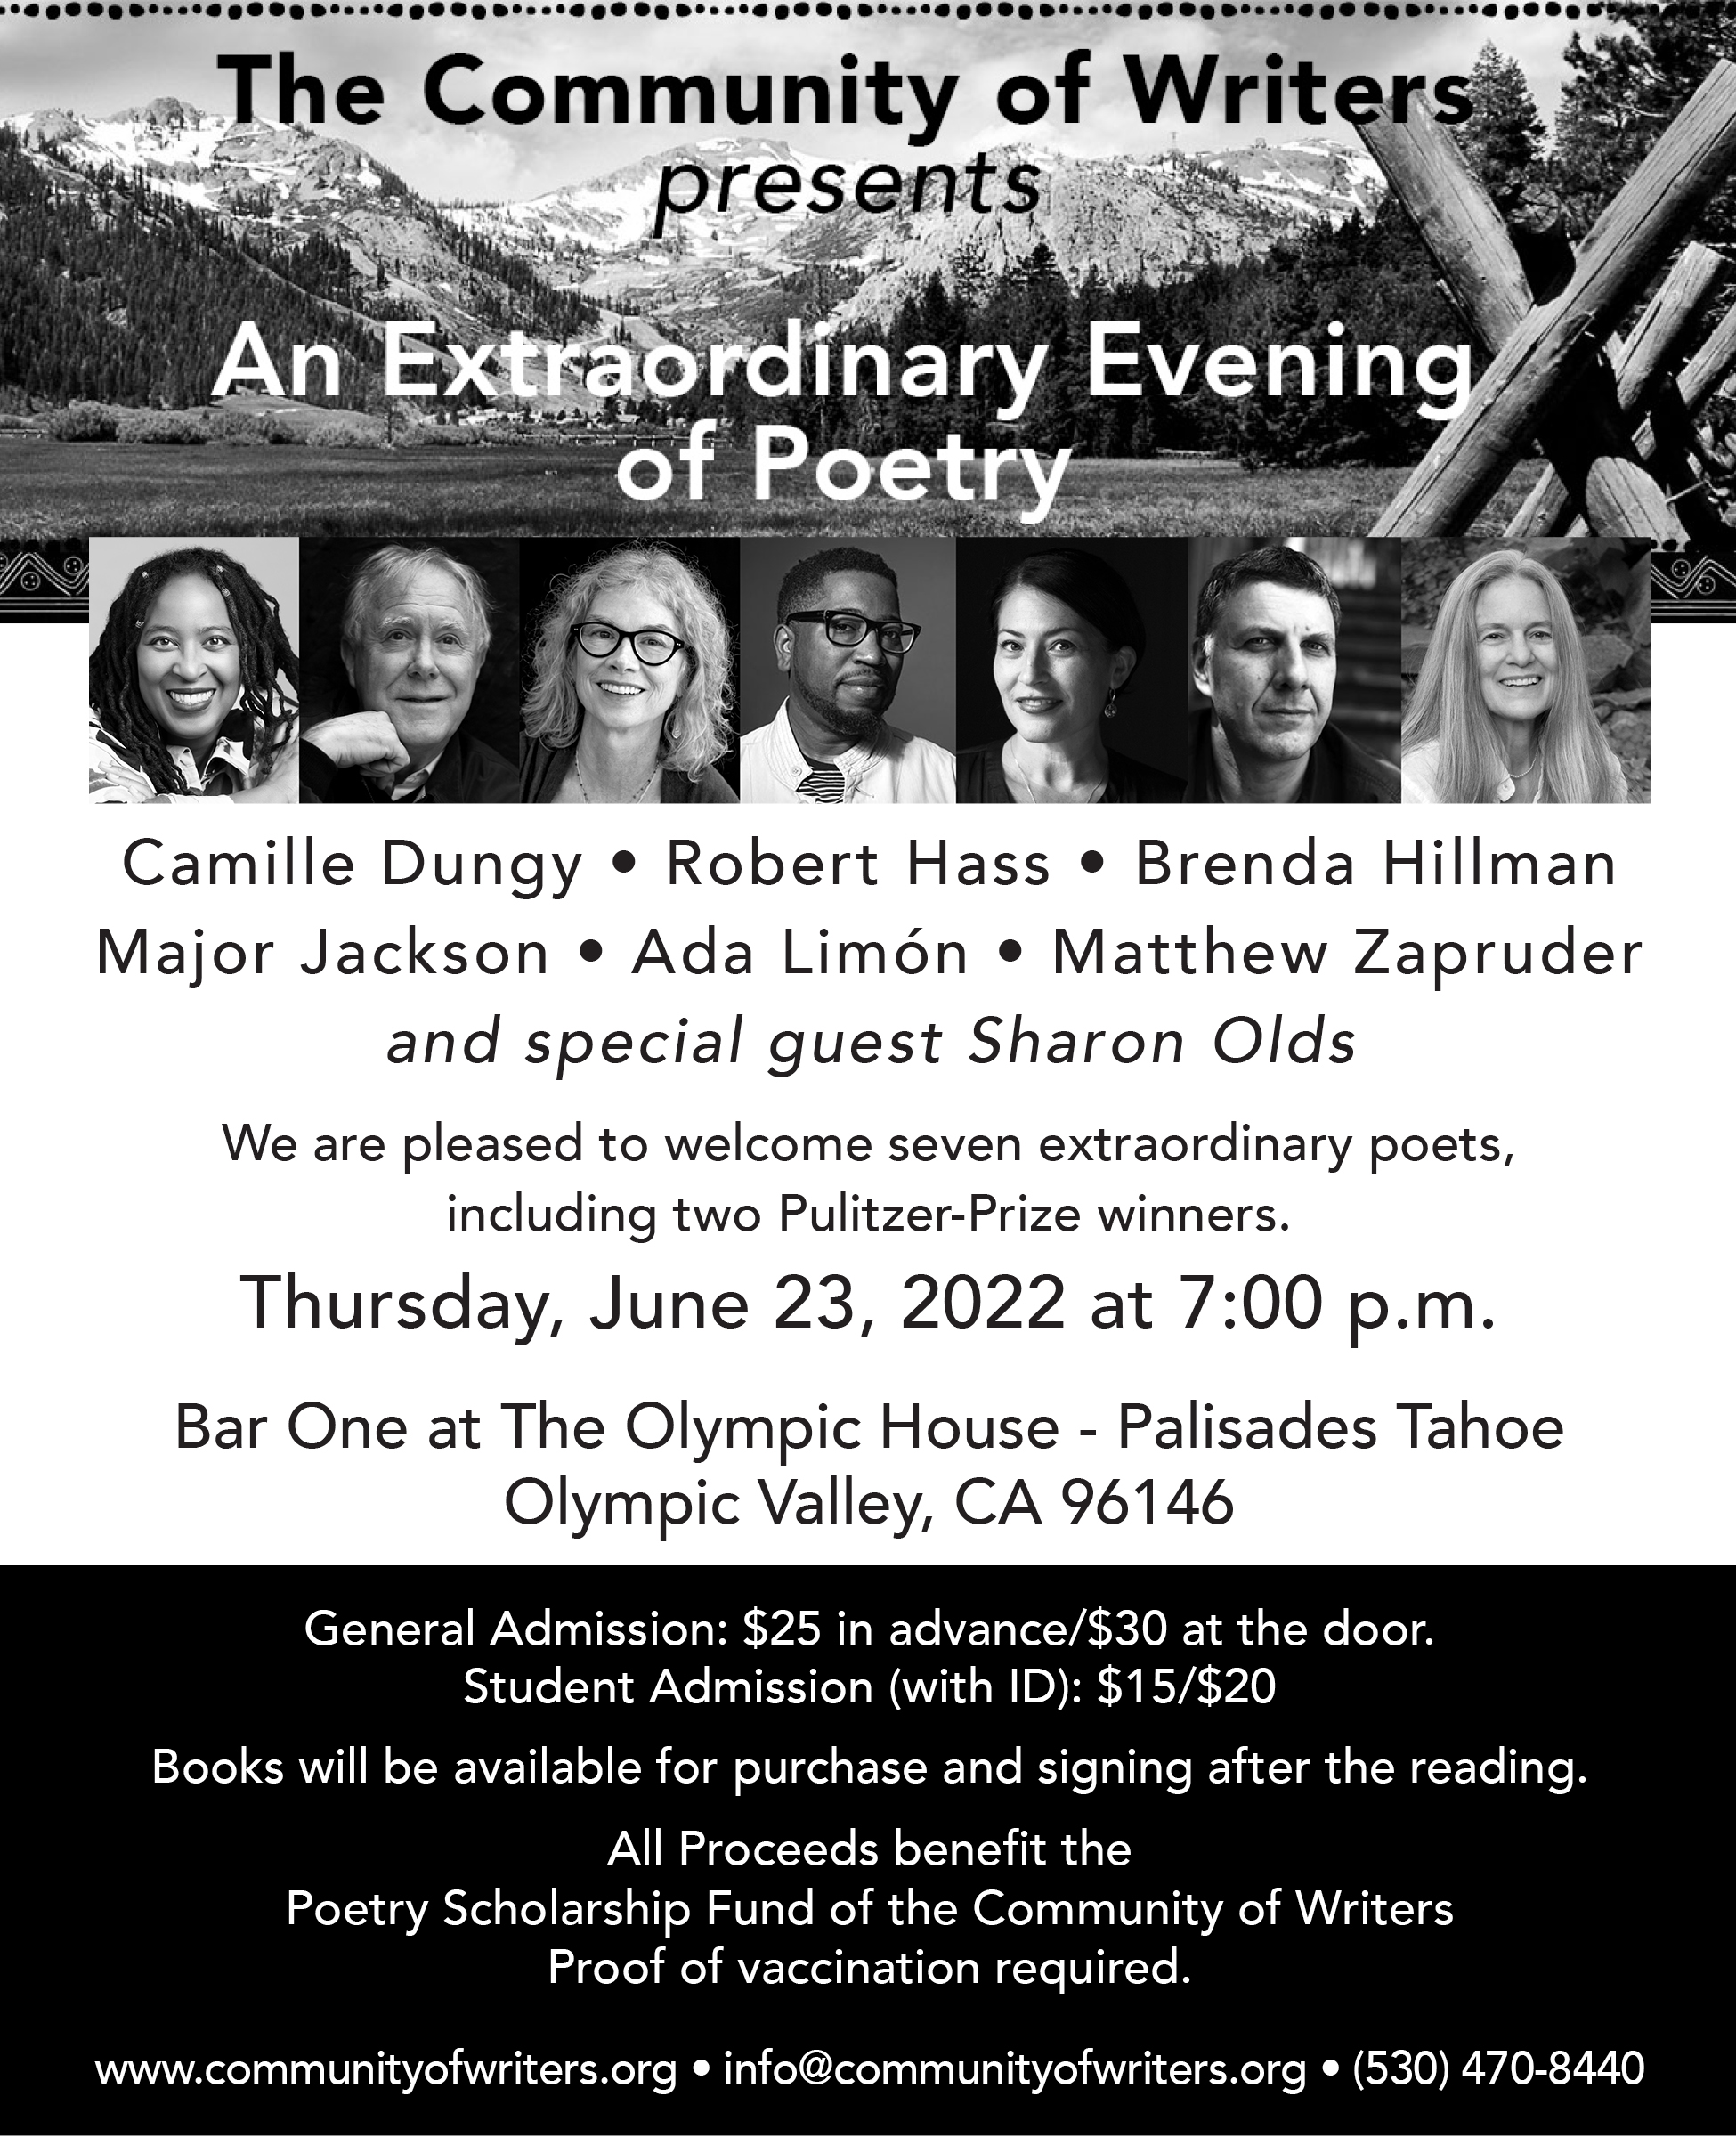 The Community of Writers Poetry Benefit Reading